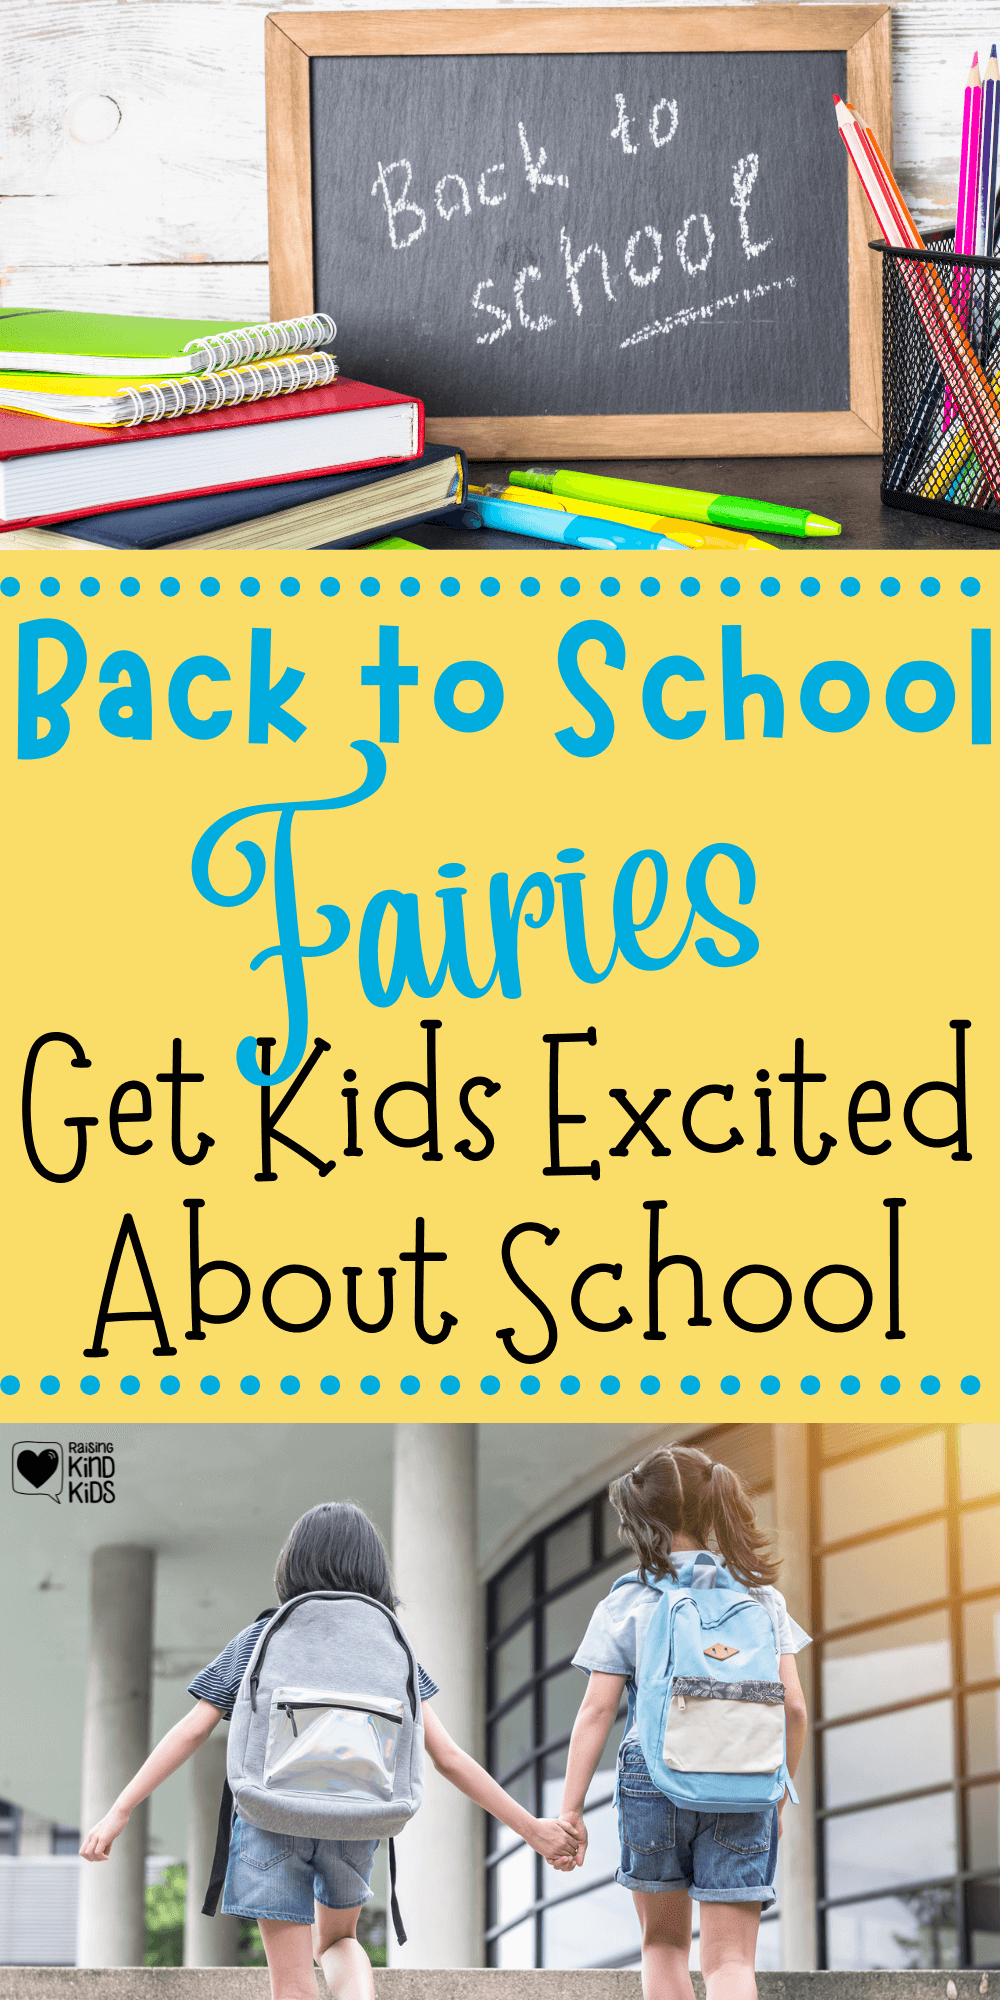 How to get kids excited about school with a visit from the back to school fairies #backtoschool #backtoschoolfairies #newschoolyear #excitedaboutschool #backtoschooltime #backtoschooltips #btstips #coffeeandcarpool #fairies